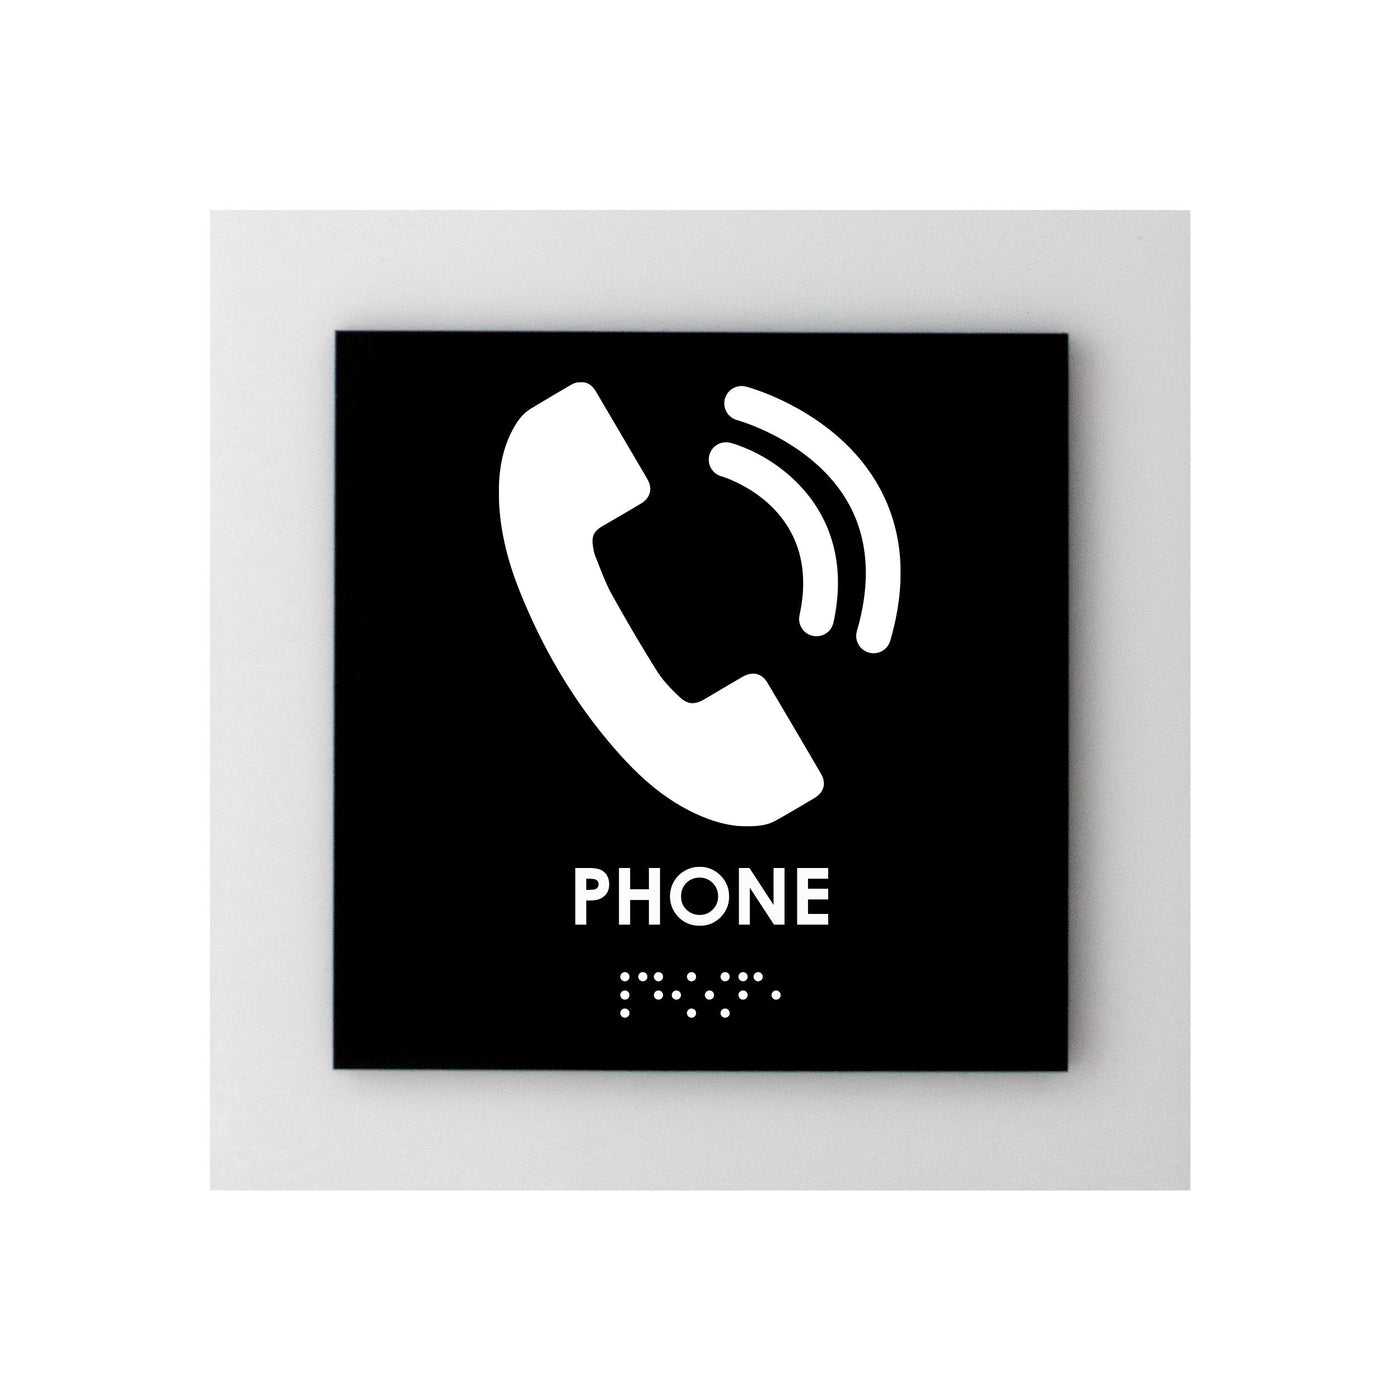 Information Signs - Acrylic Phone Sign "Simple" Design